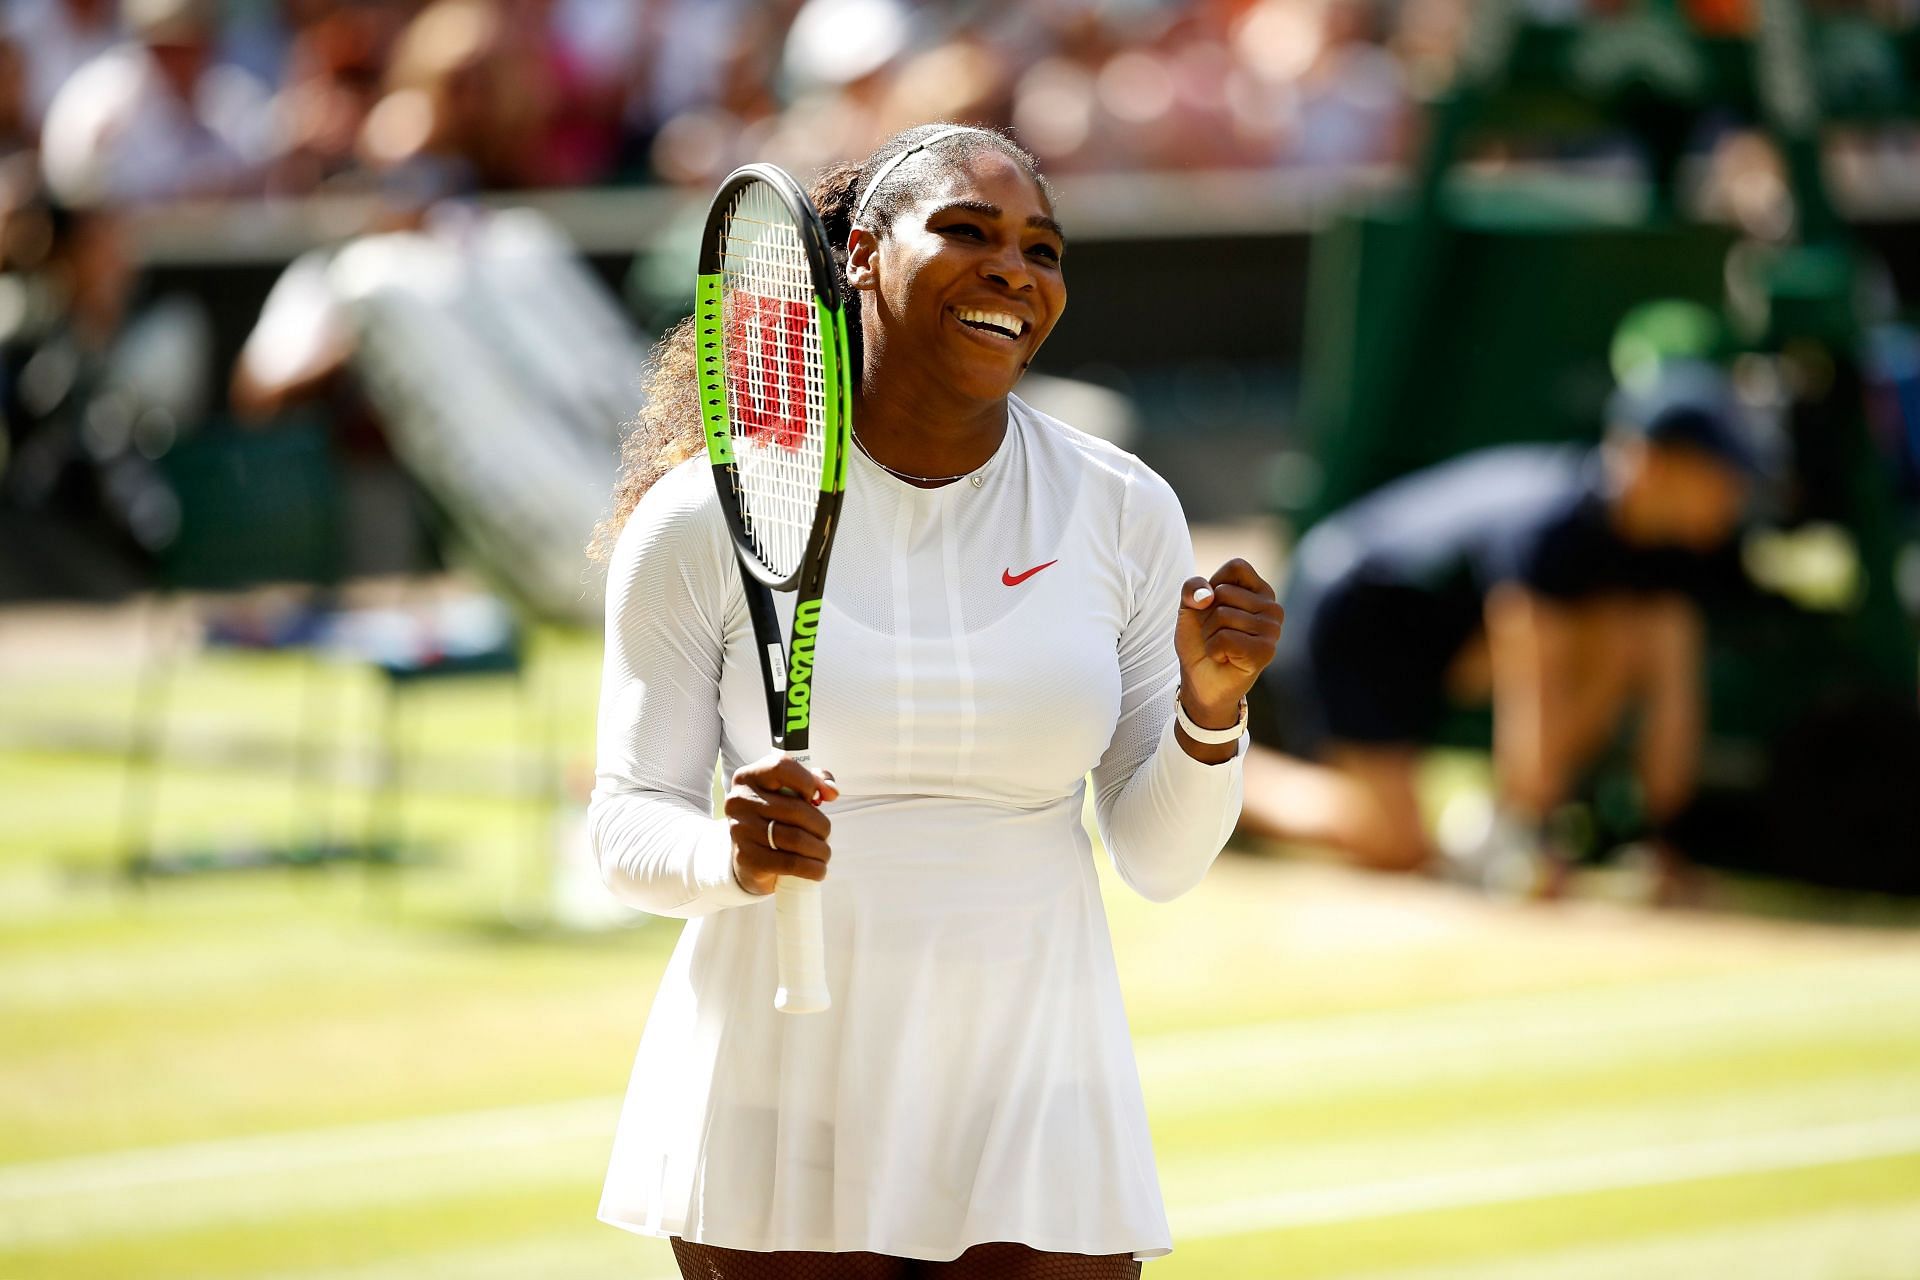 Serena Williams pictured during the 2018 Wimbledon Championships